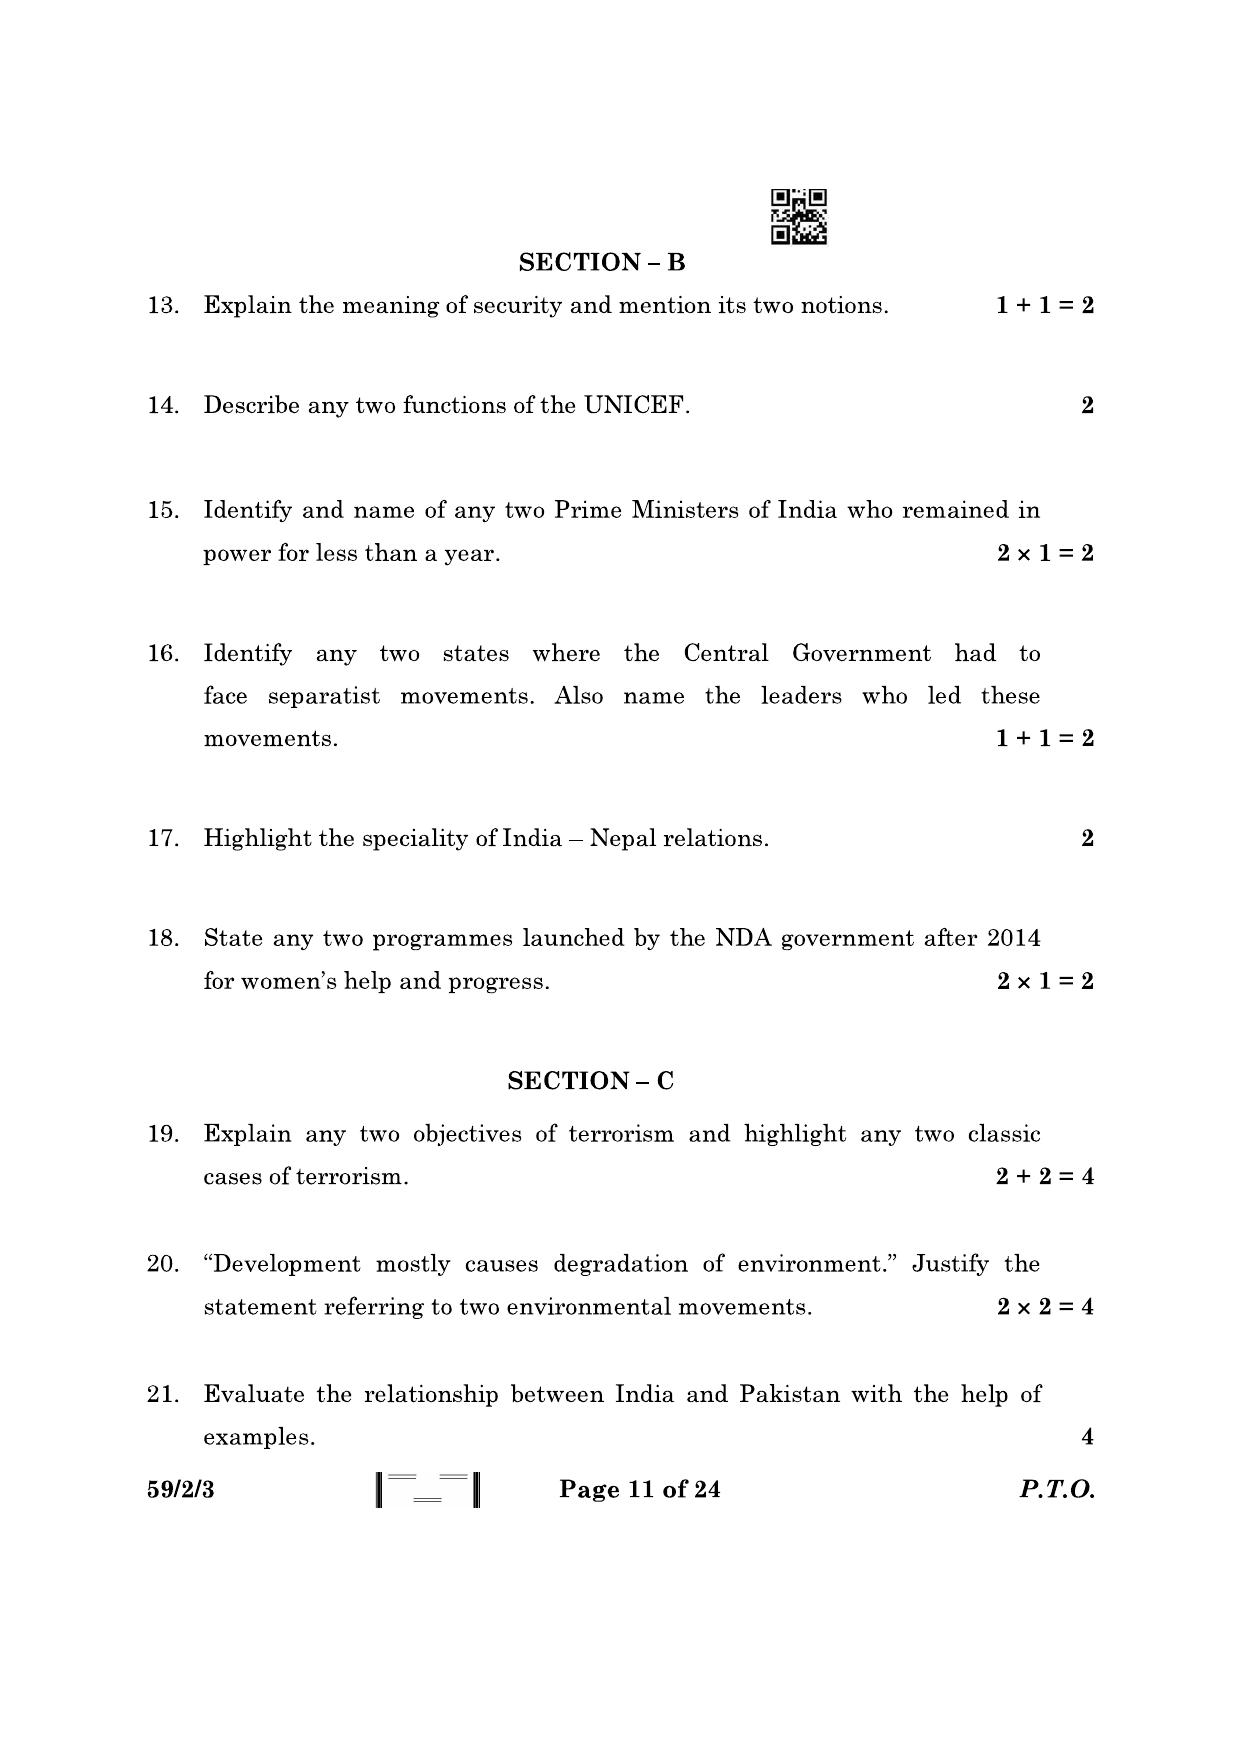 CBSE Class 12 59-2-3 Political Science 2023 Question Paper - Page 11